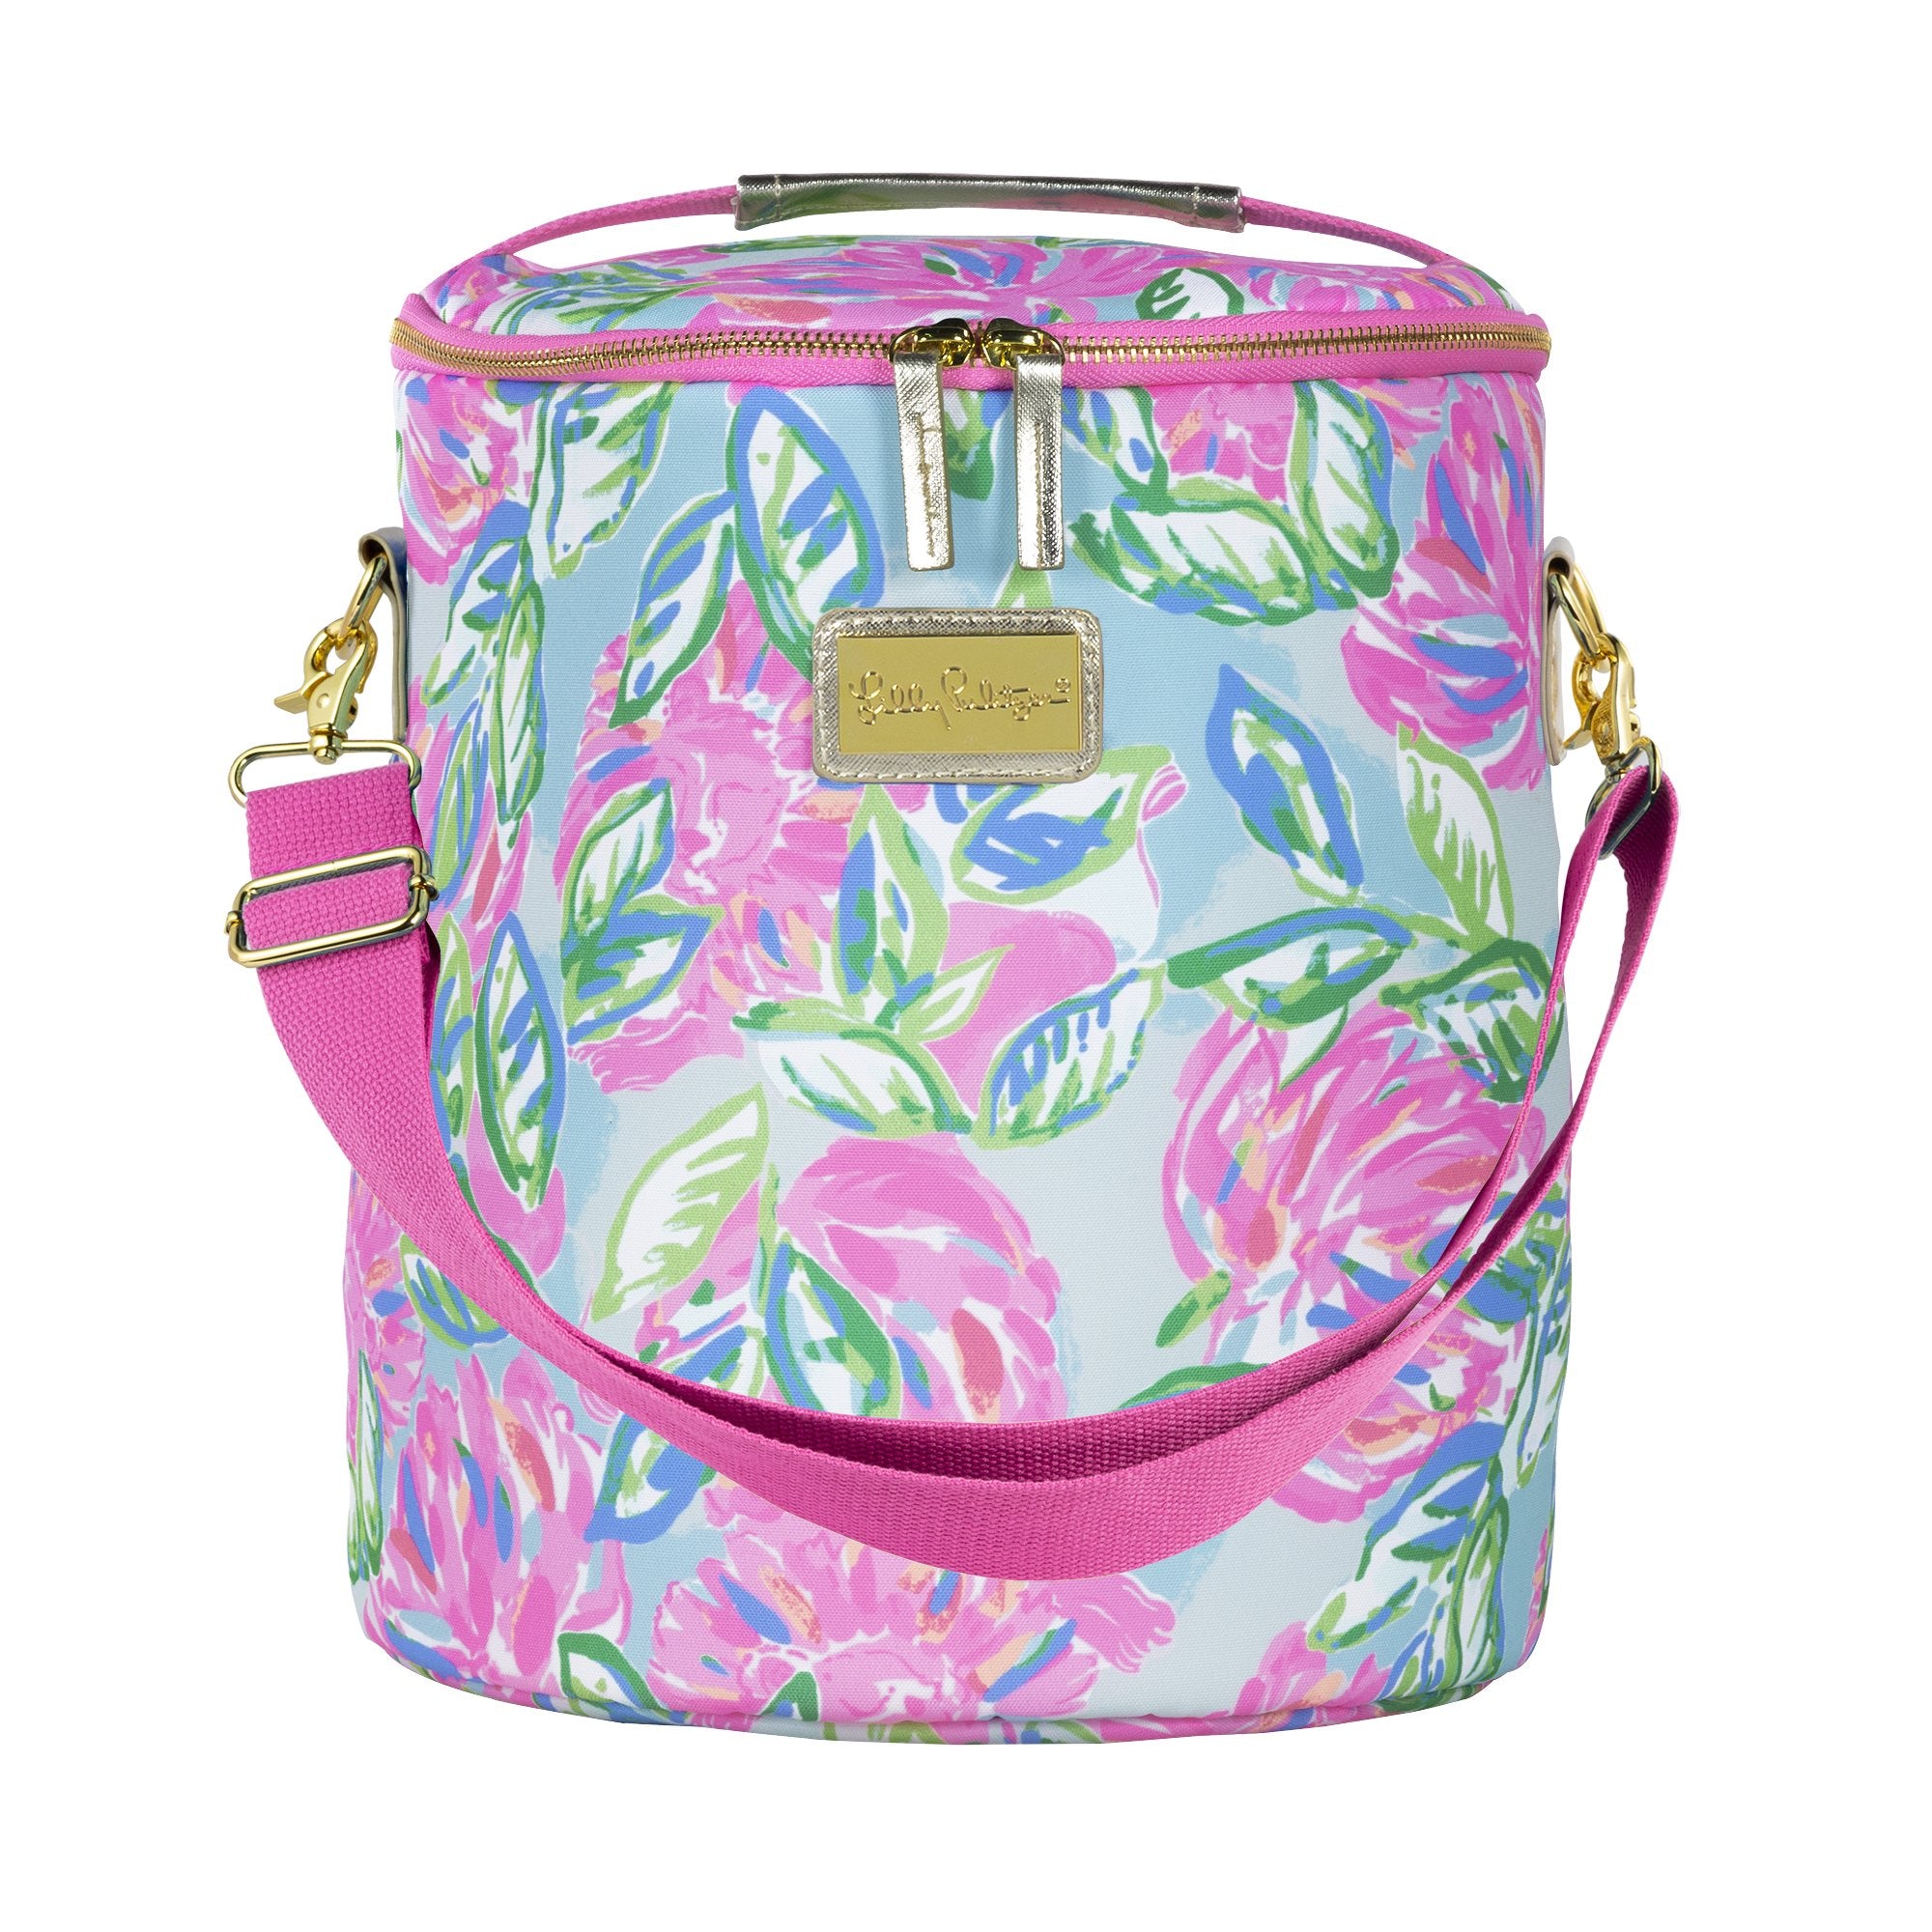 Lilly Pulitzer Beach Cooler, Totally Blossom